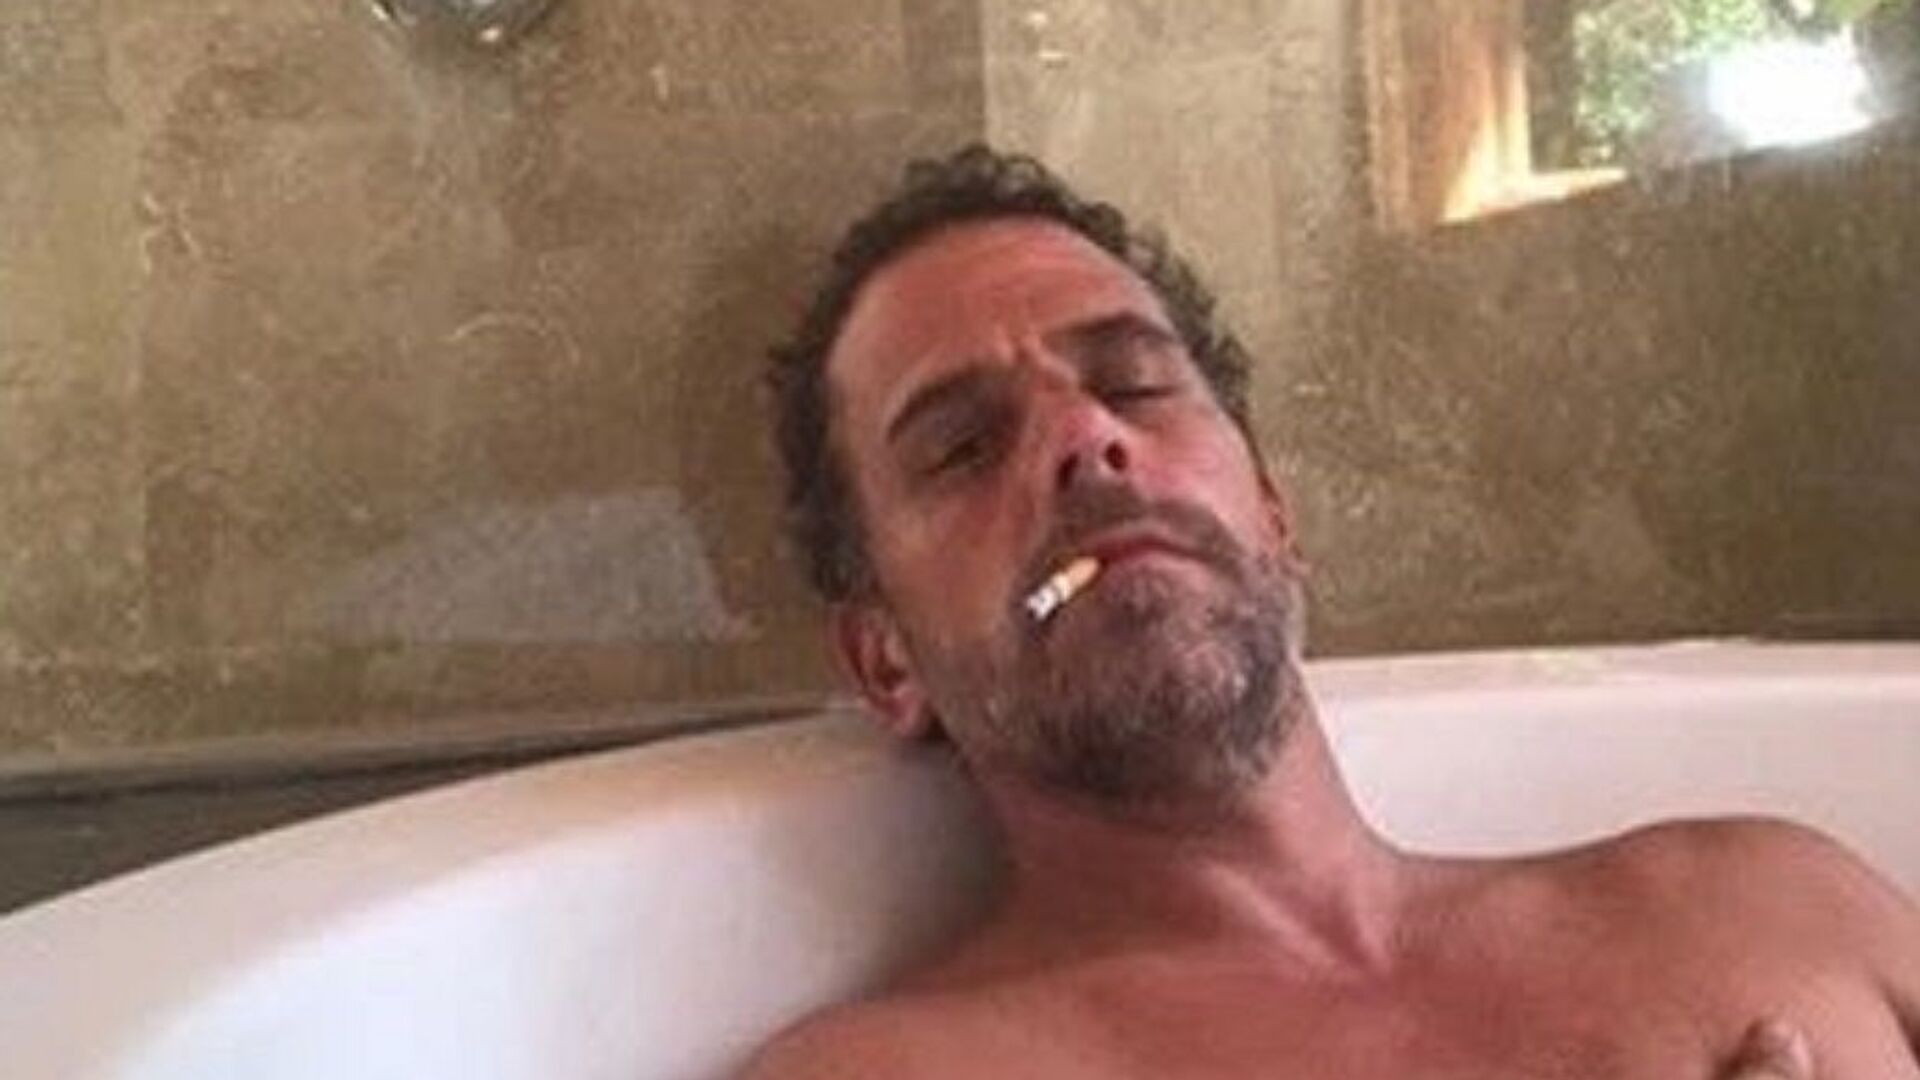 Photo of Hunter Biden relaxing in a bathtub, reportedly taken from a computer dropped off at a Delaware computer repair shop. - Sputnik International, 1920, 07.05.2022